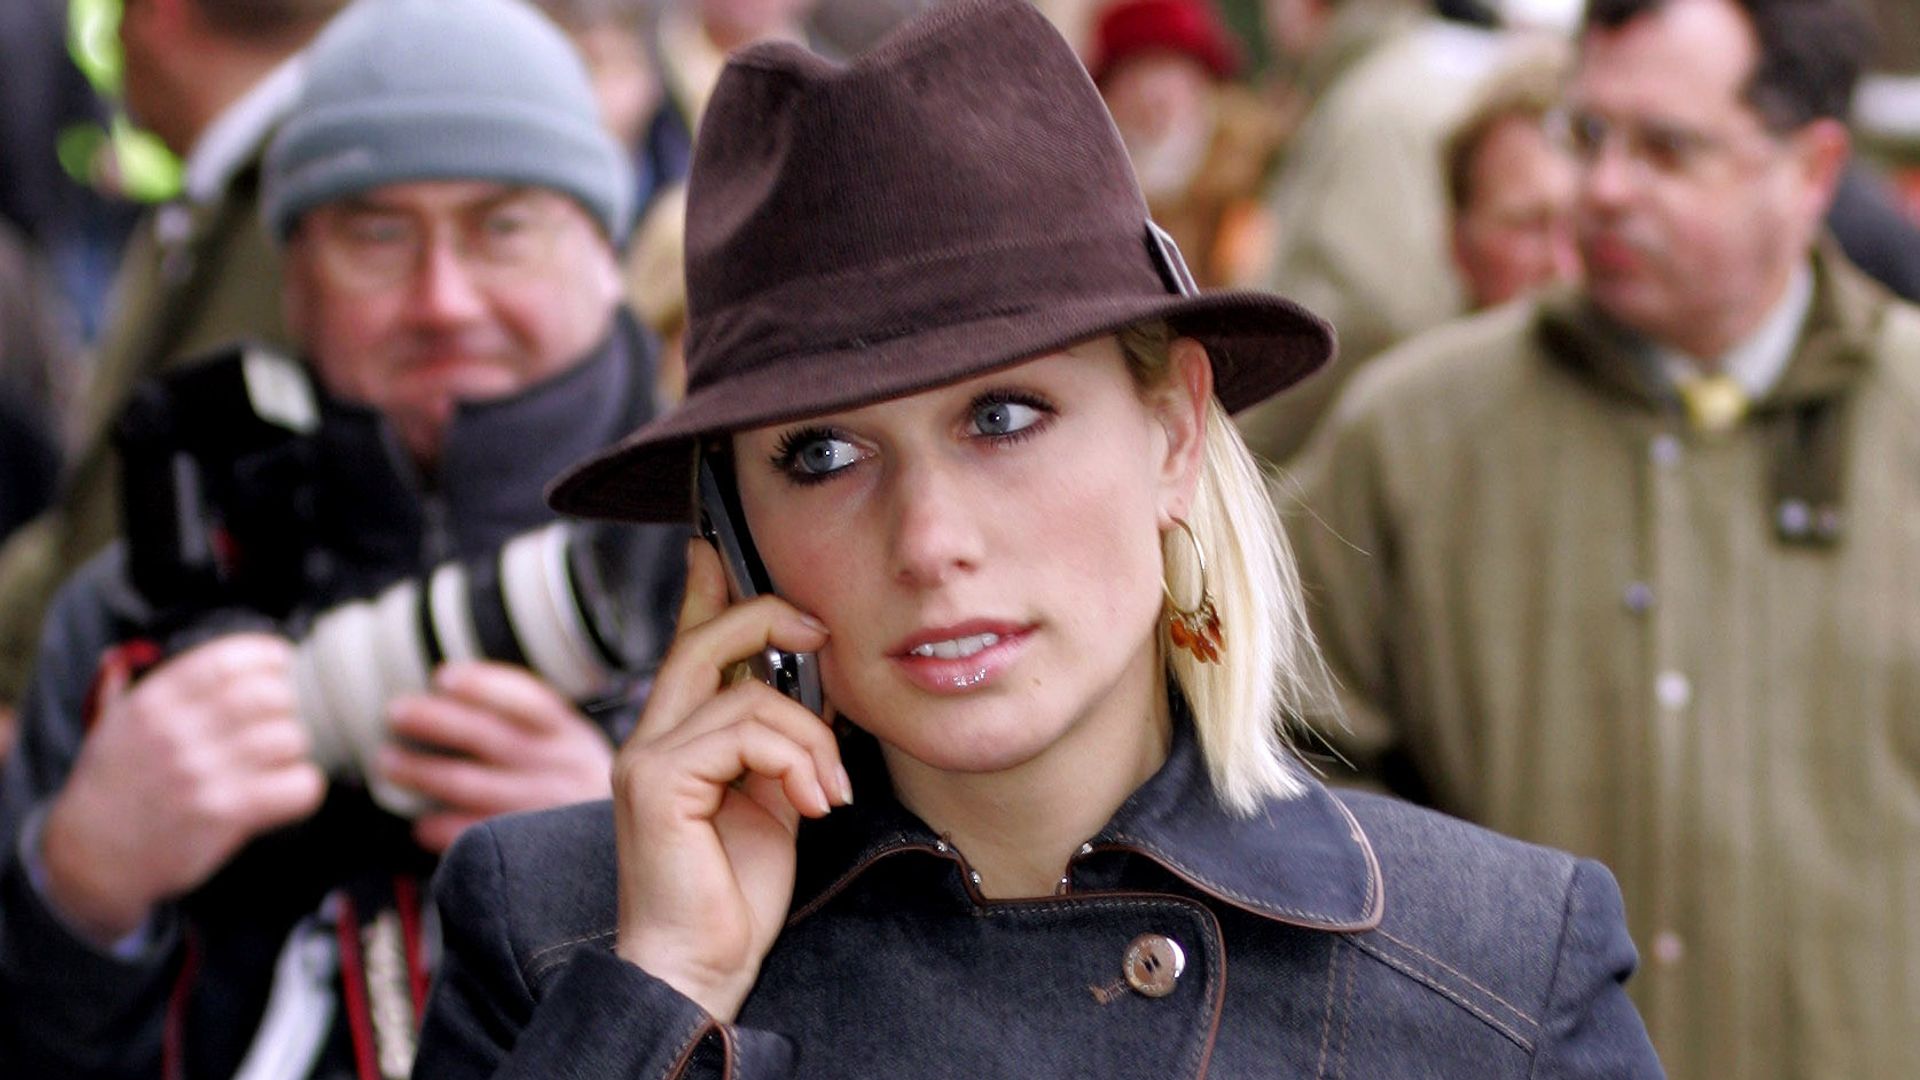 Zara tindall in hat on phone in 2006